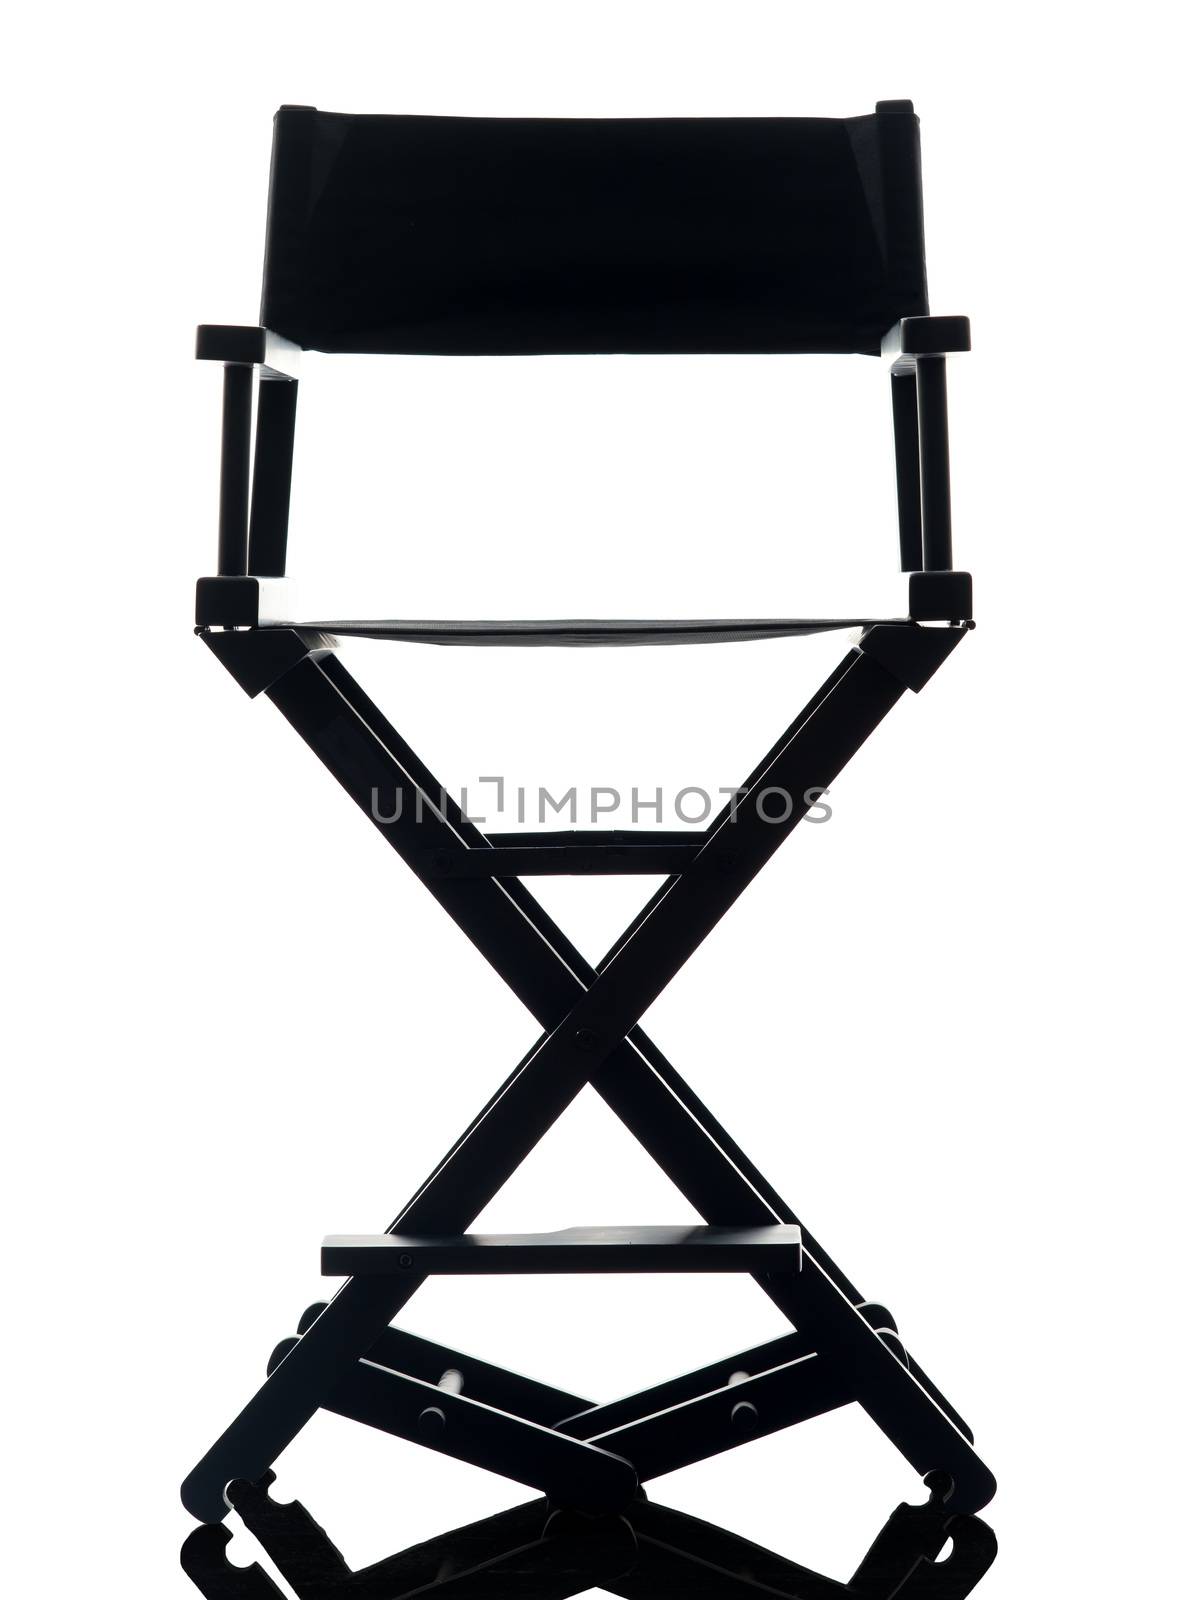 one director chair  in silhouette  on white background